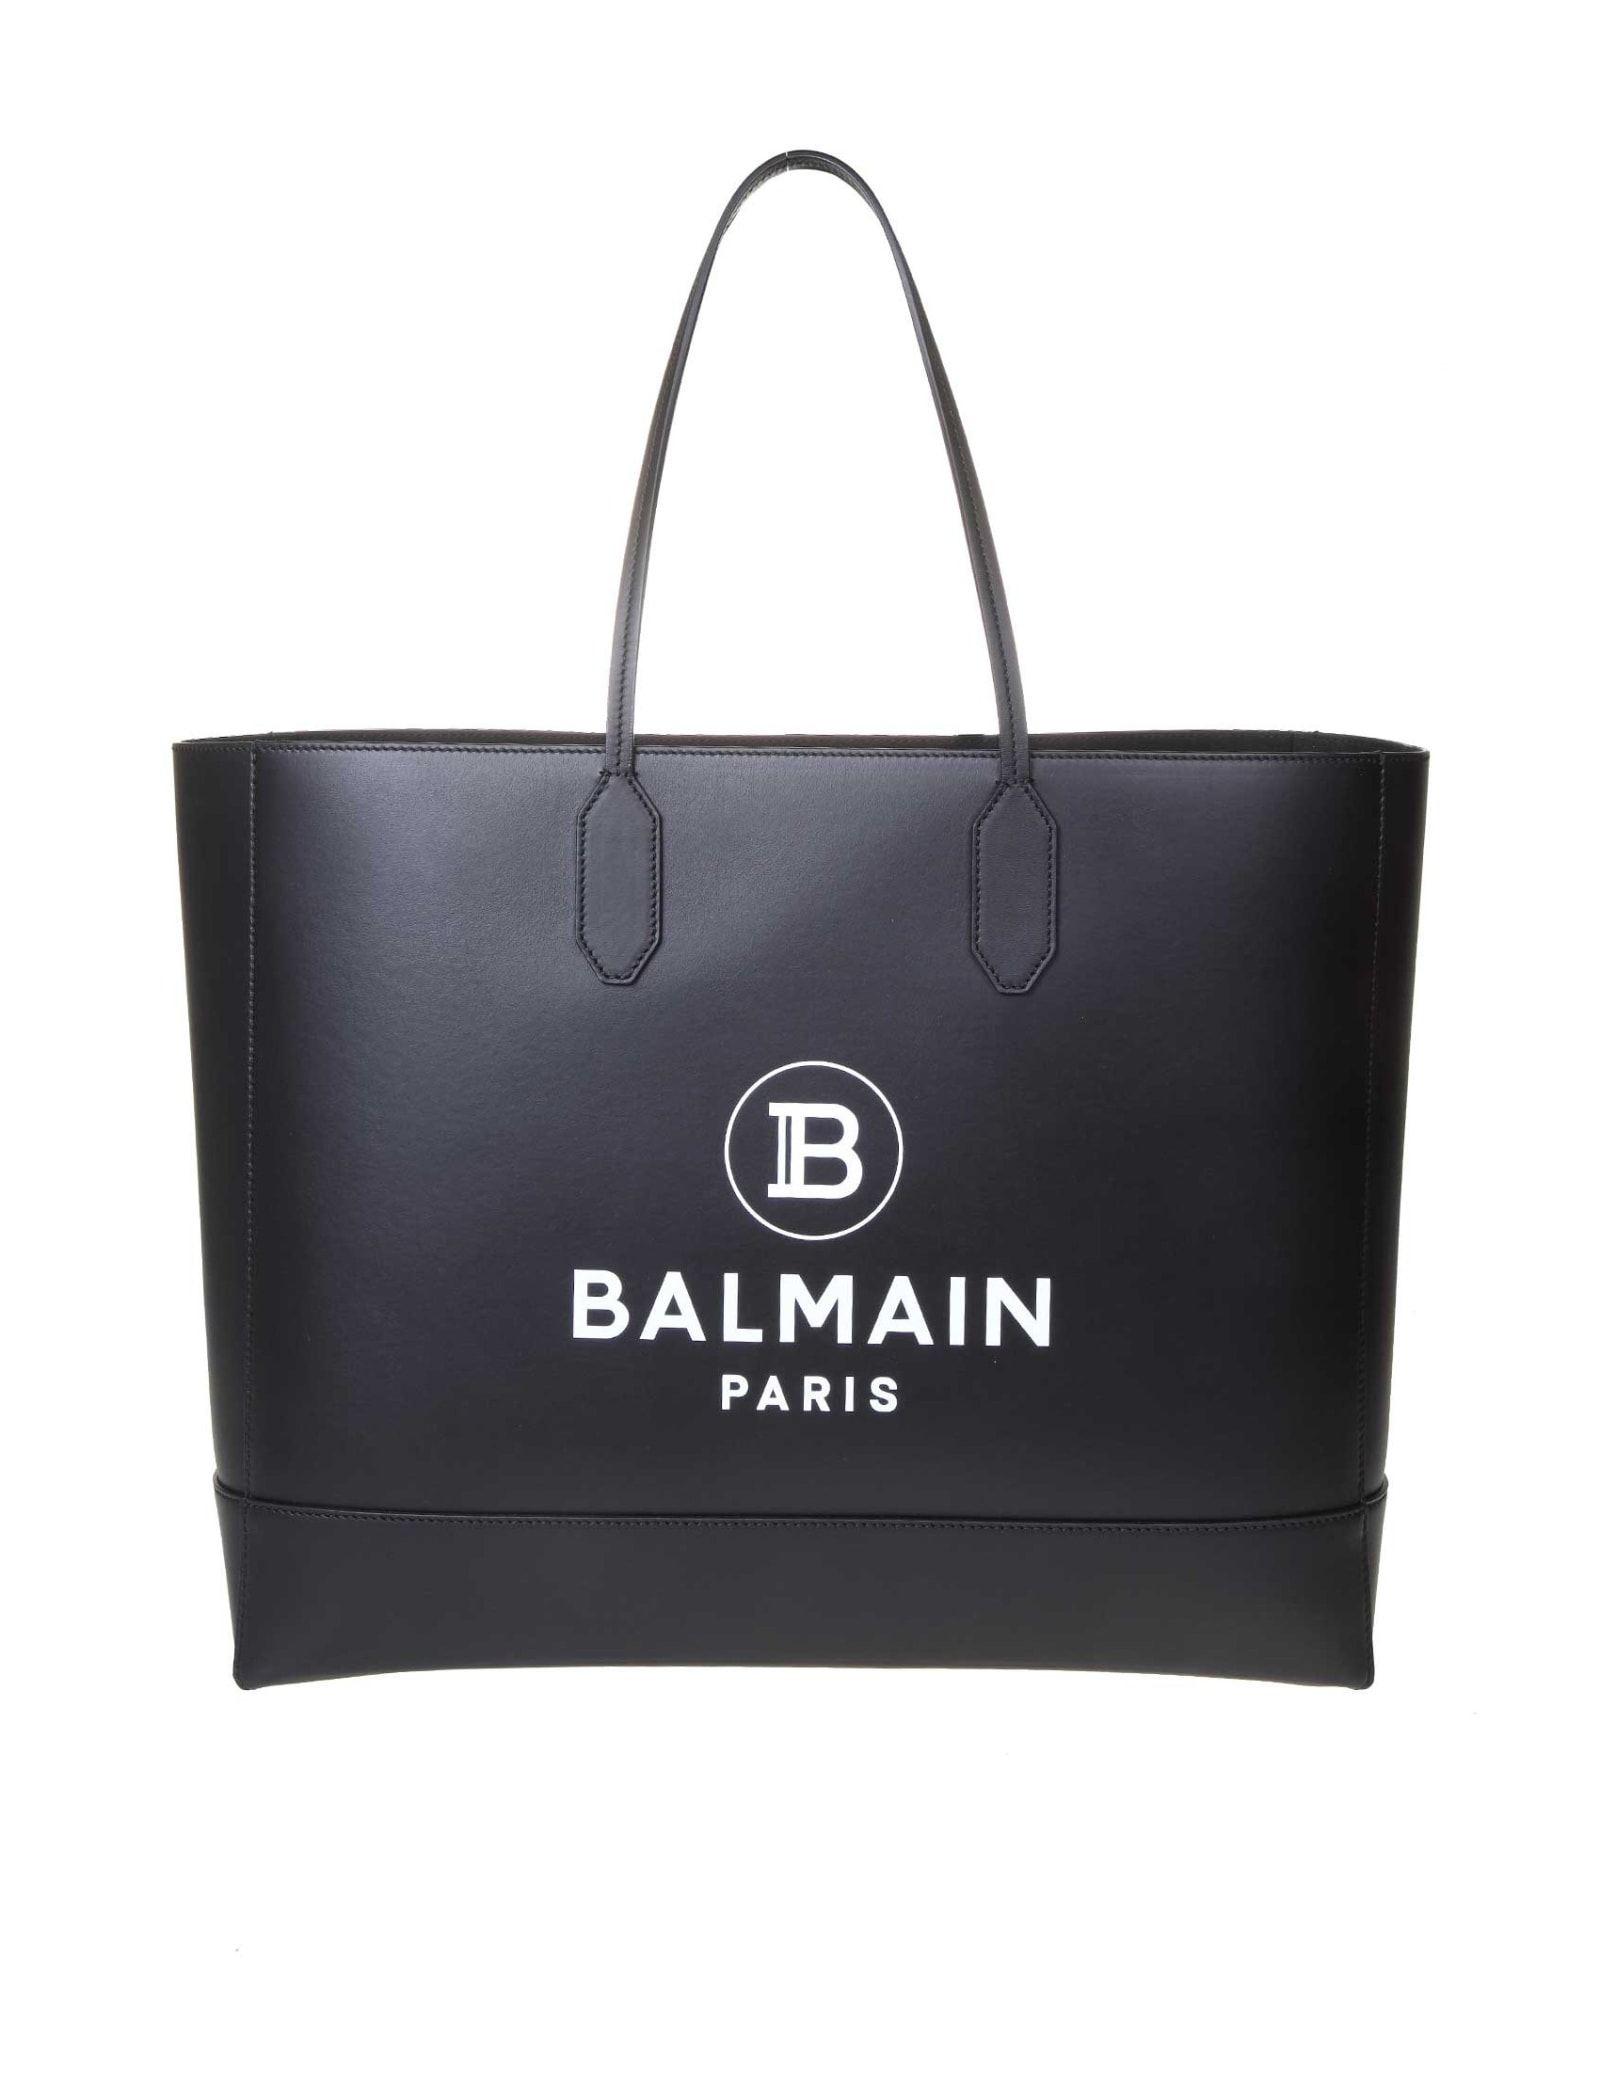 BALMAIN SHOPPING IN BLACK LEATHER WITH LOGO,11244813